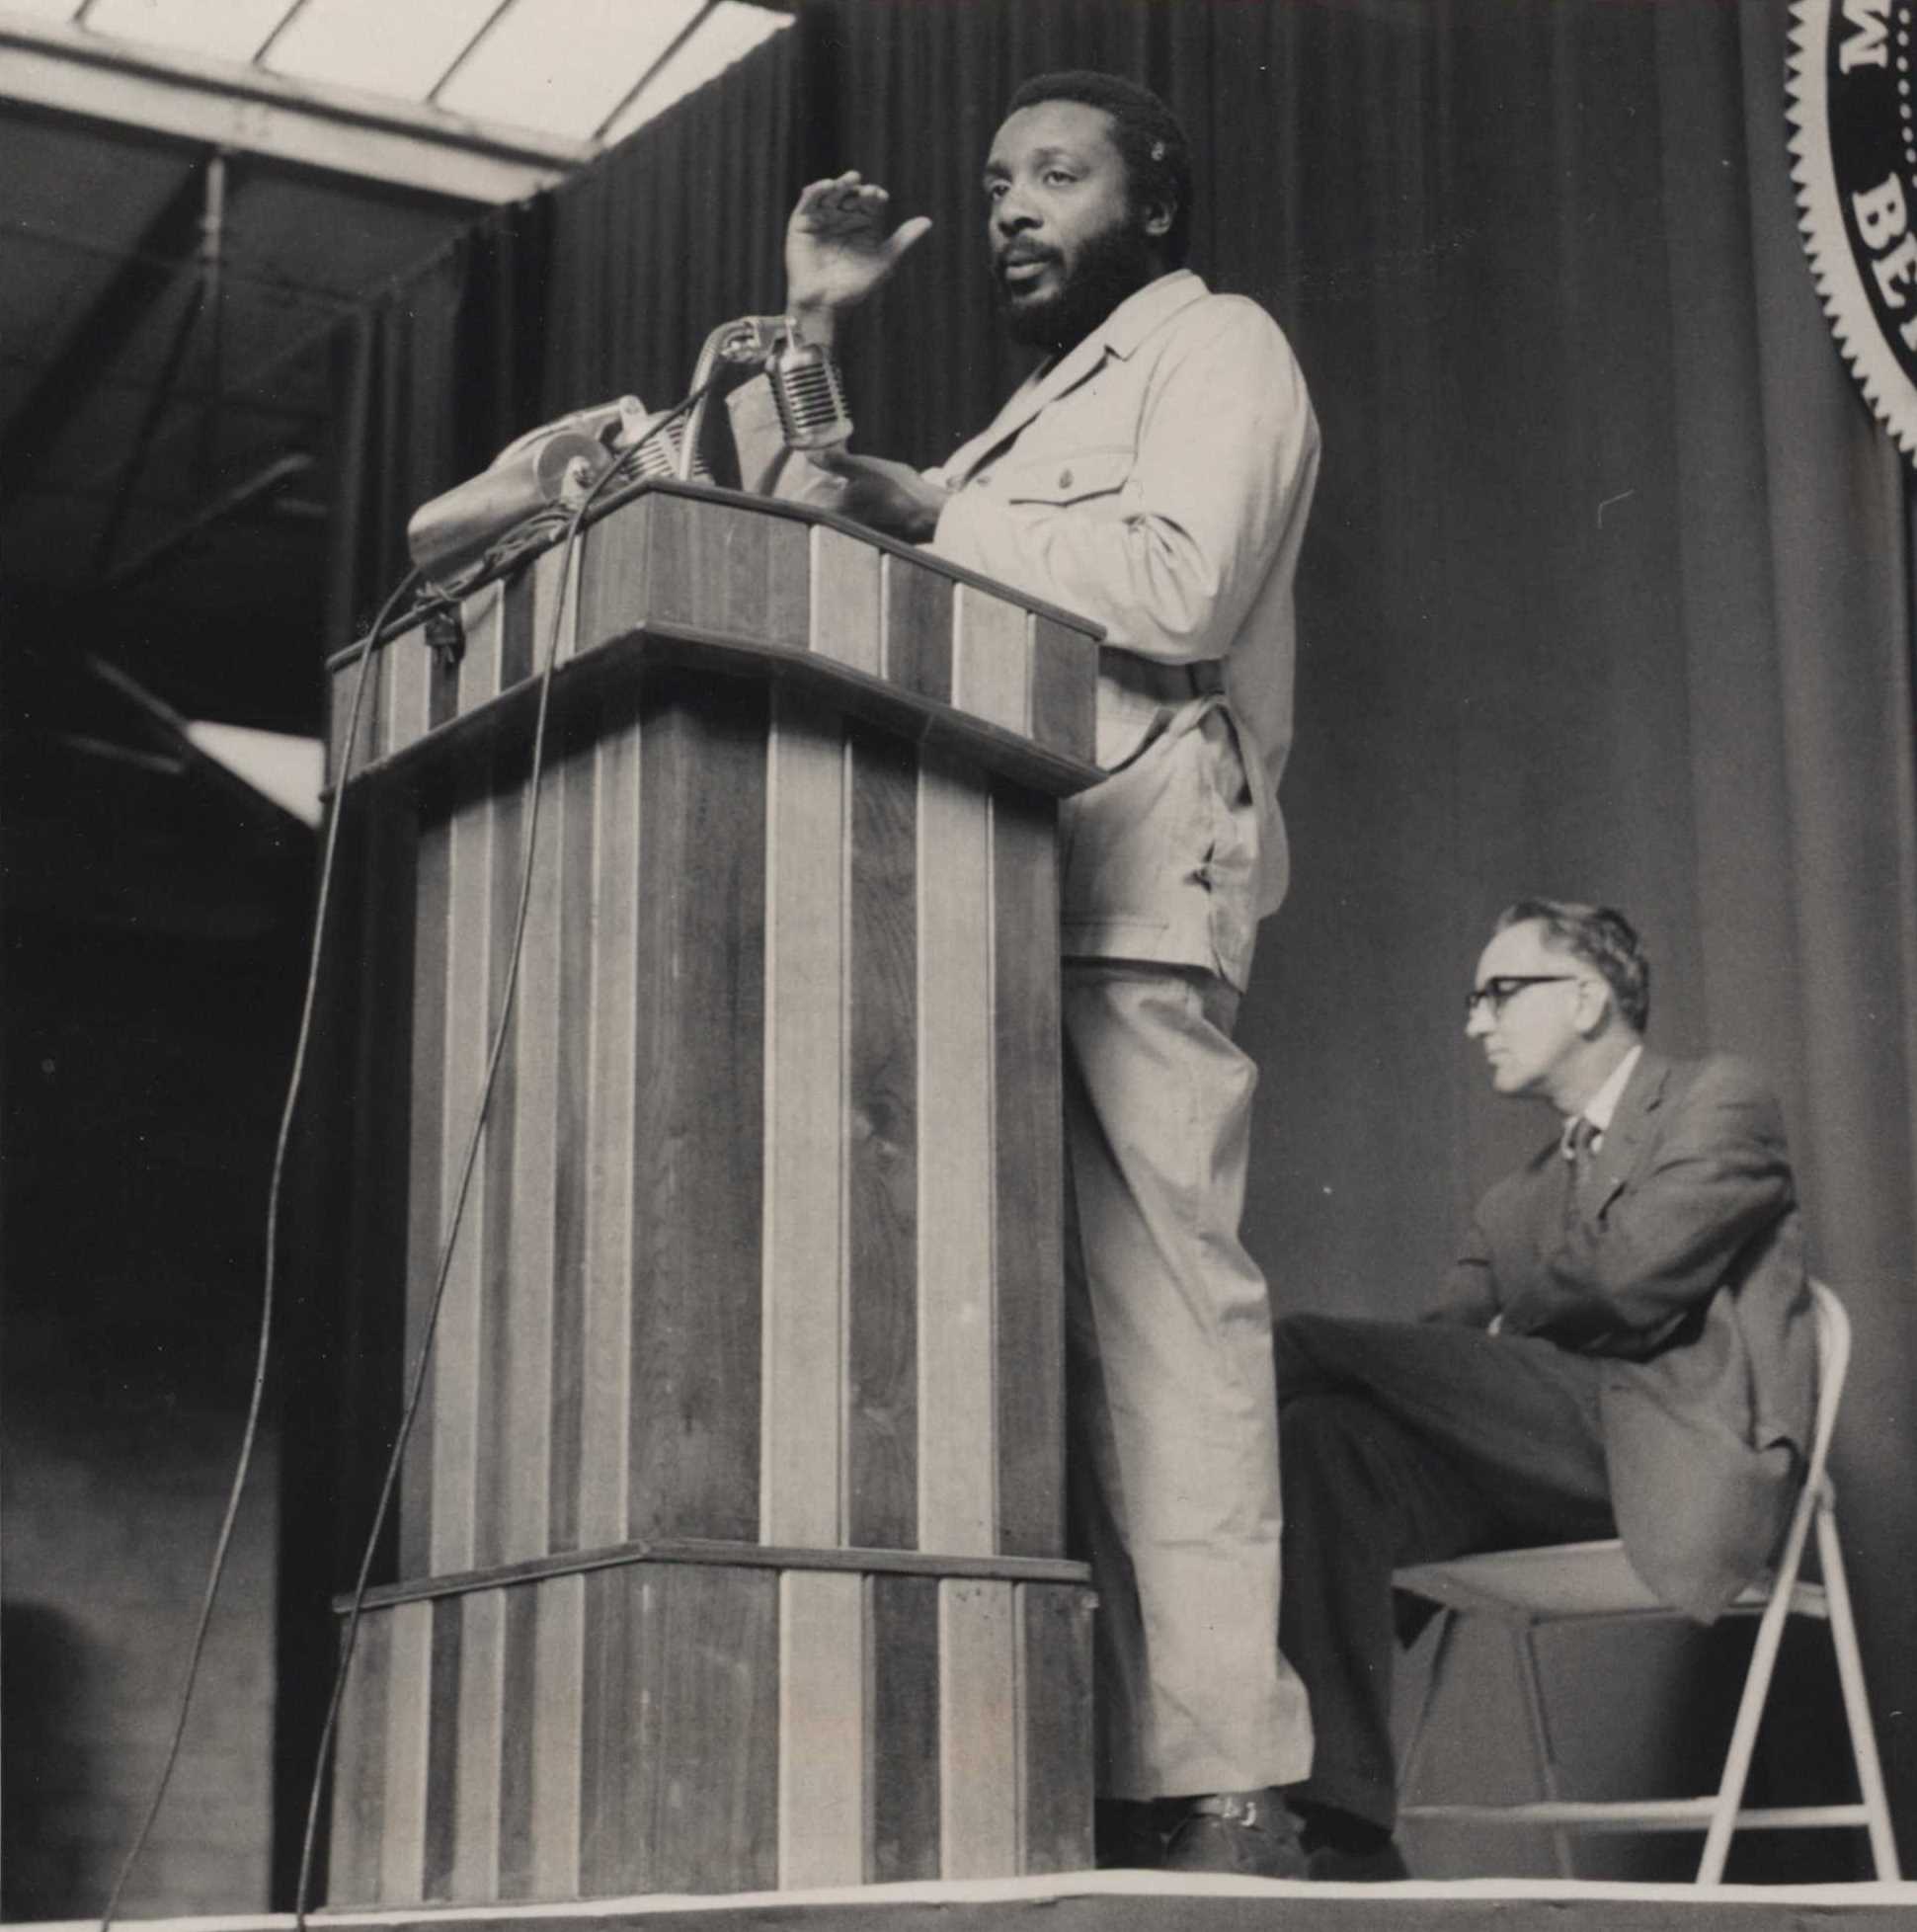 Dick Gregory at Moravian College, 1968